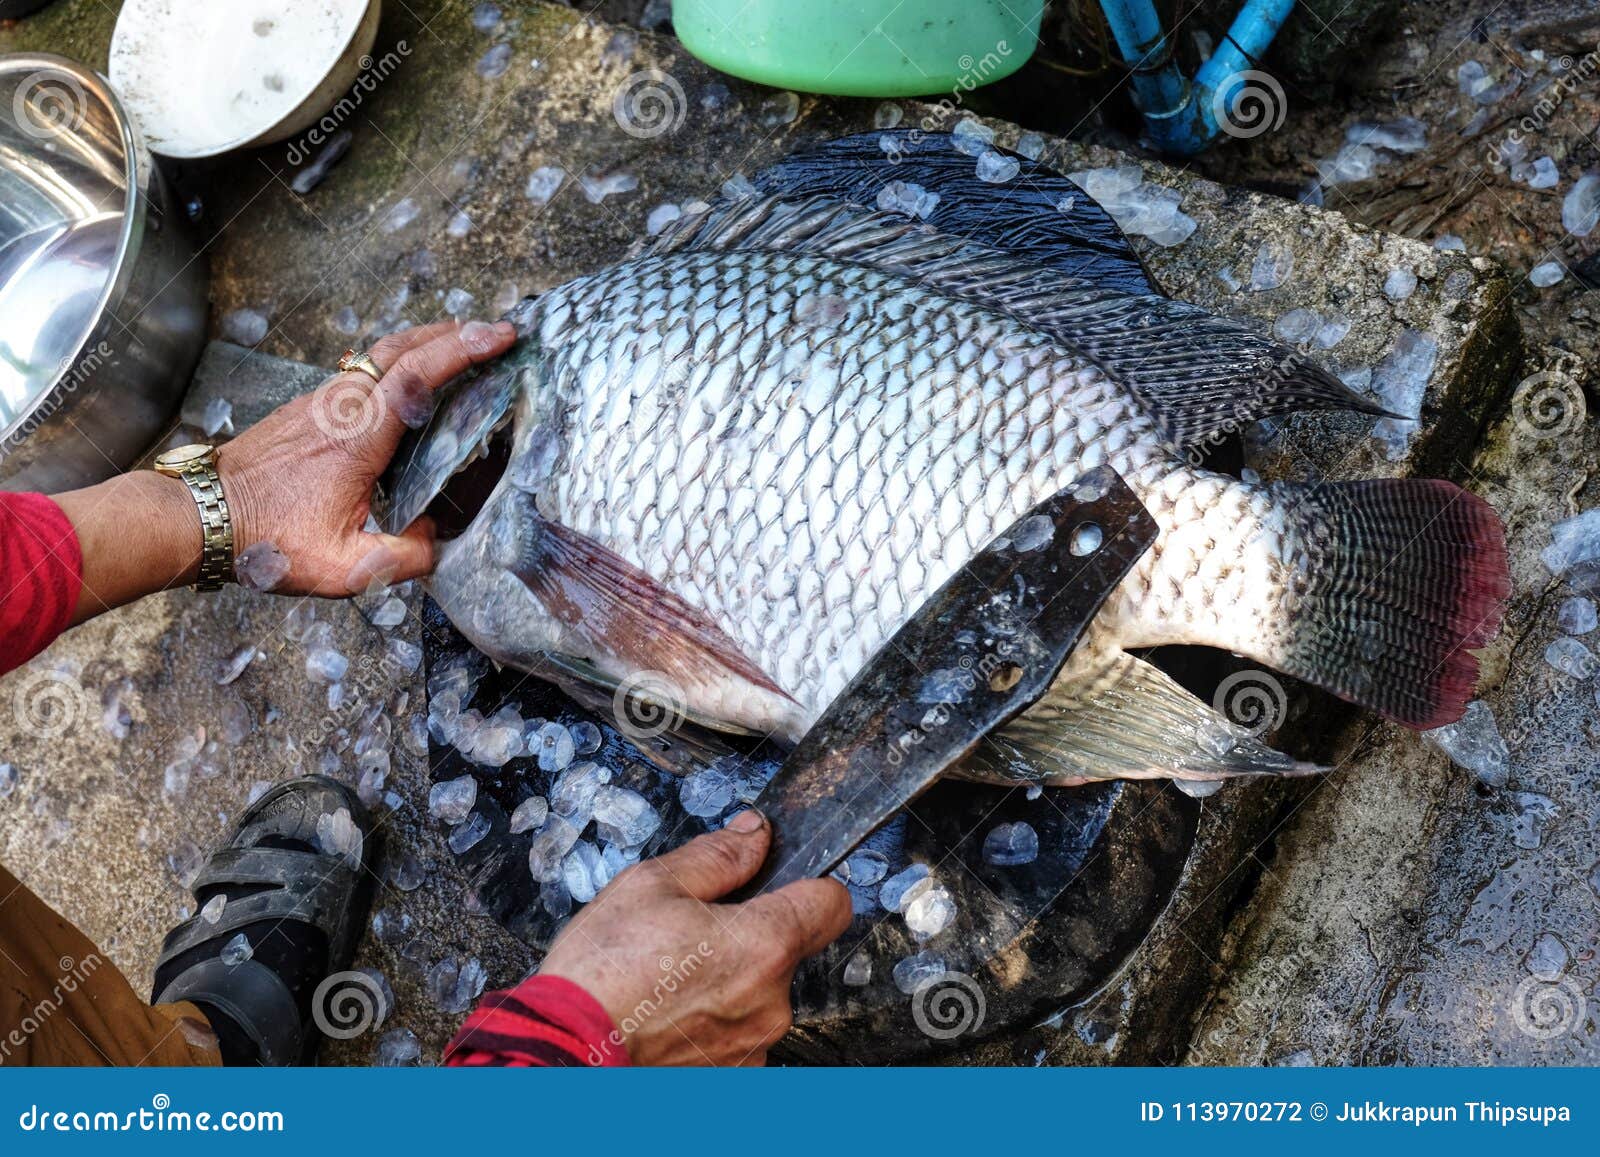 Large Size Tilapia is a Eviscerated Fish with a Knife, Fish Market